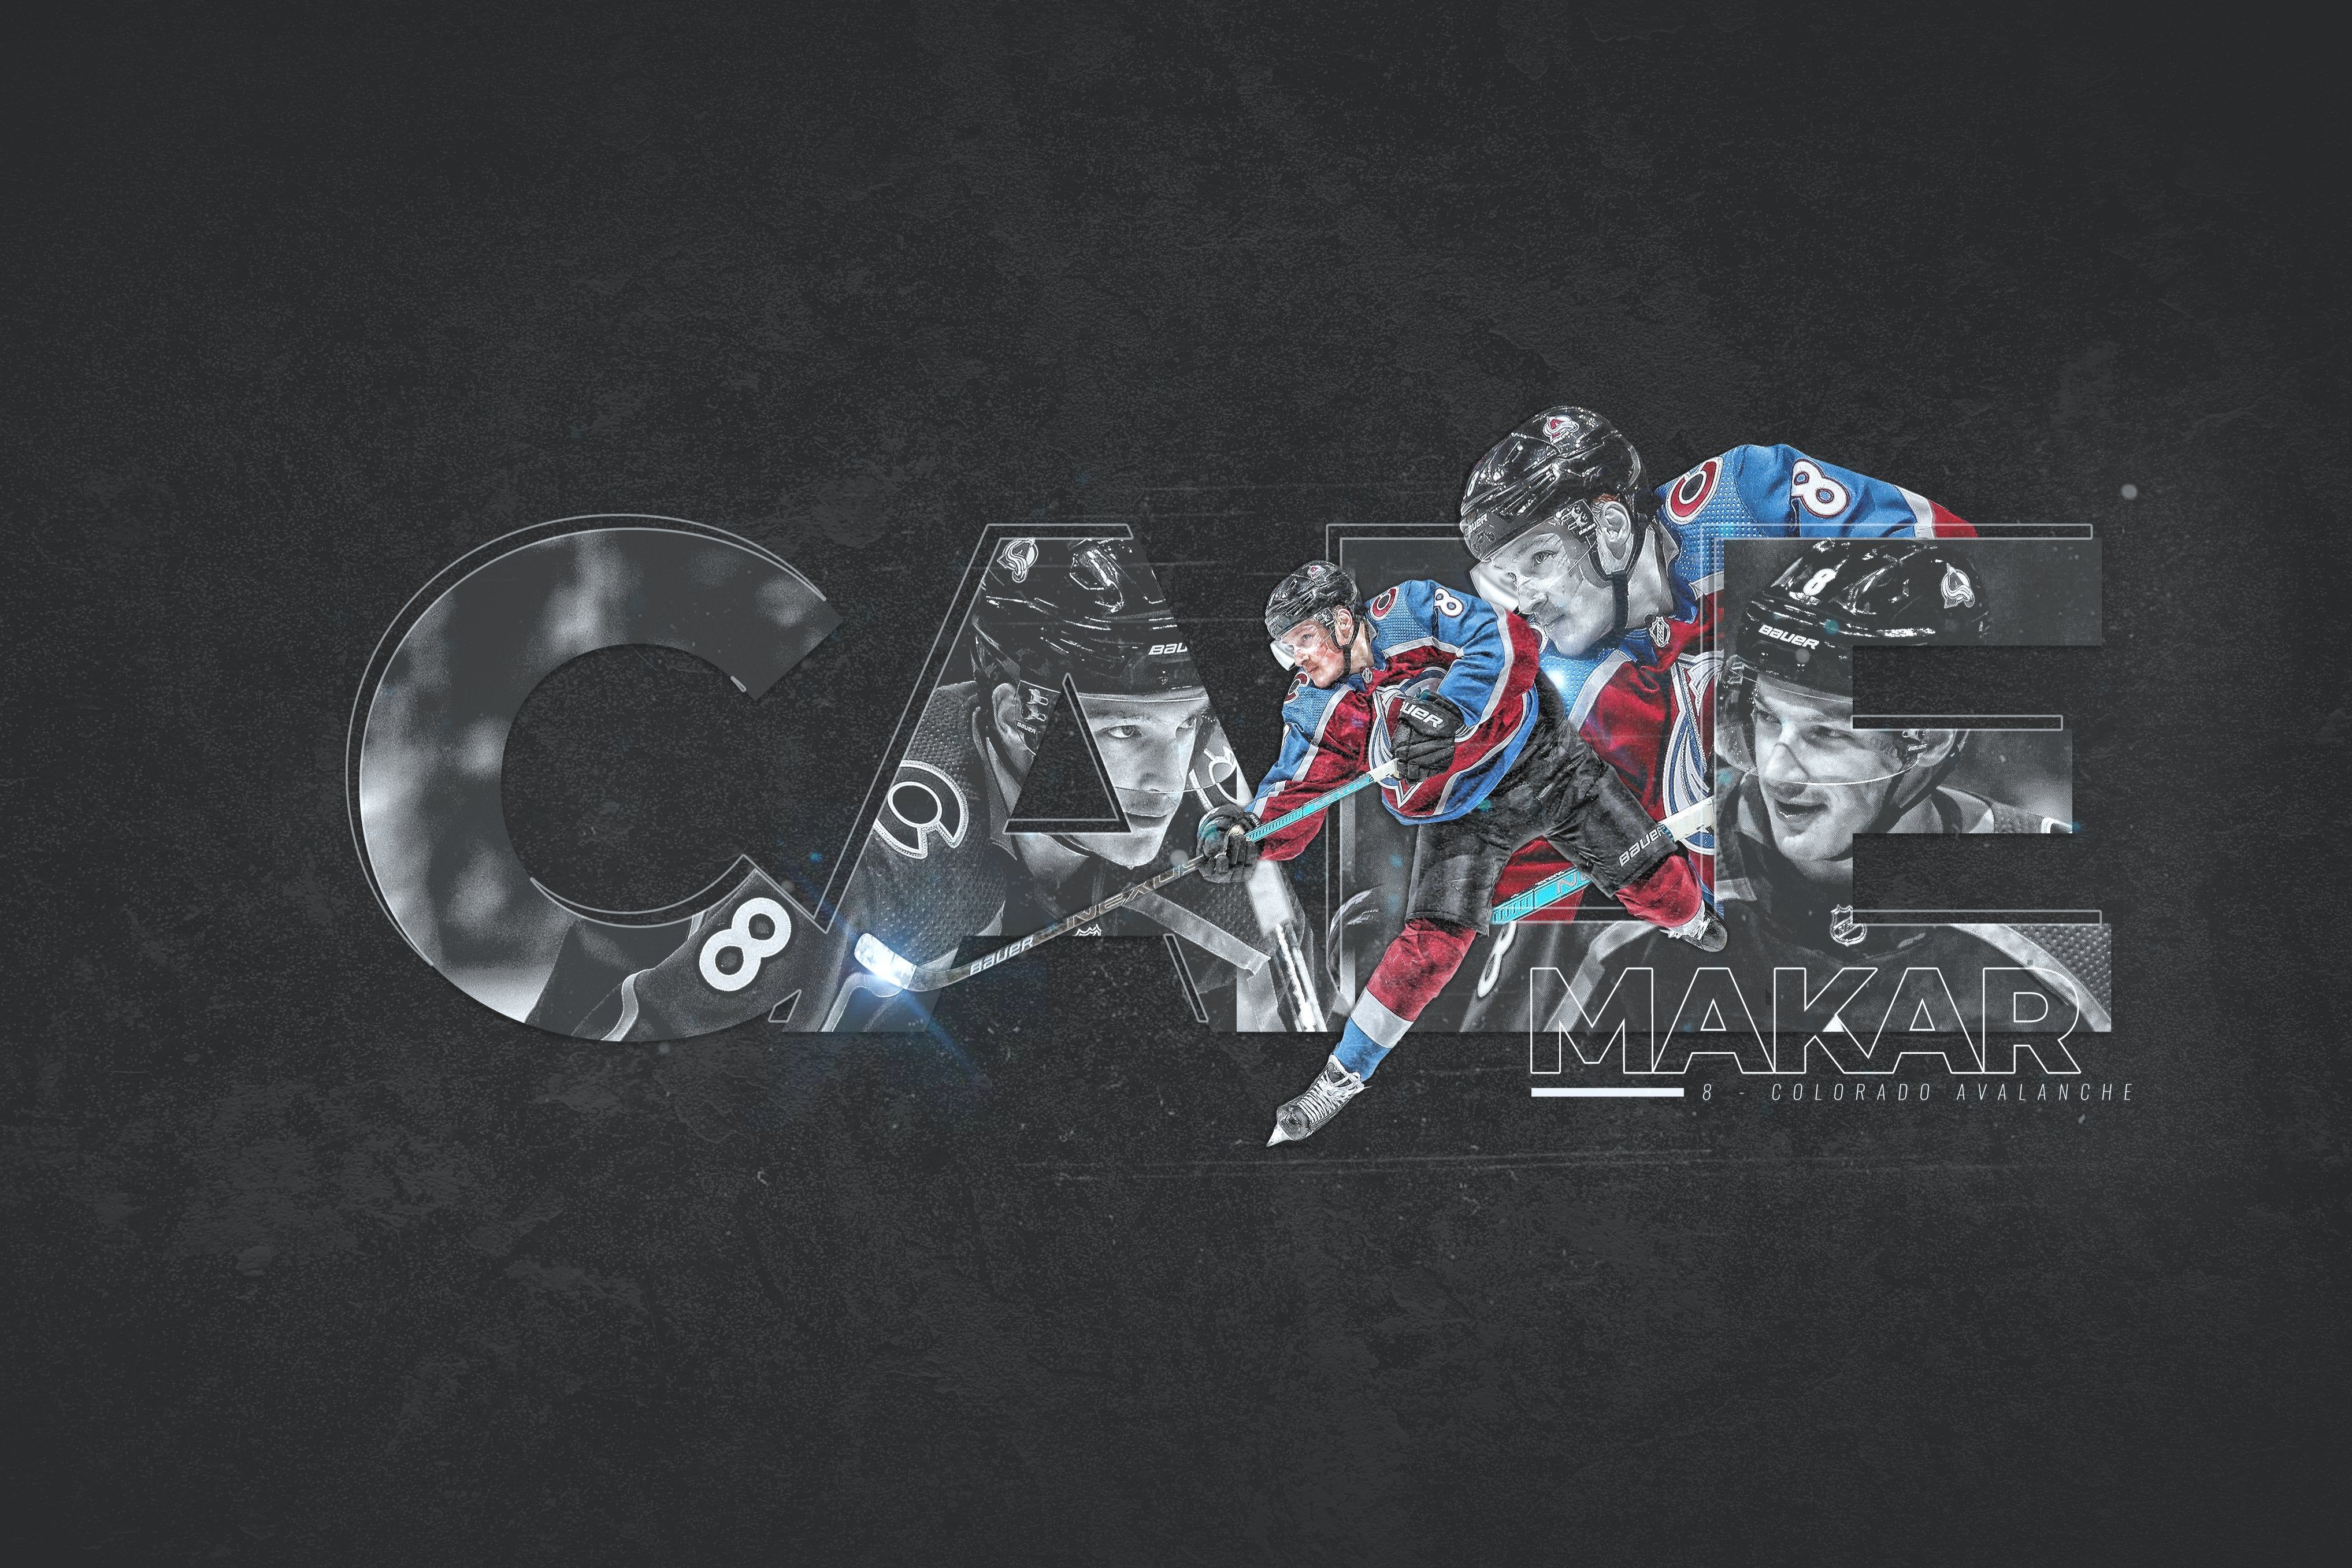 Cale Makar Wallpapers : ColoradoAvalanche.